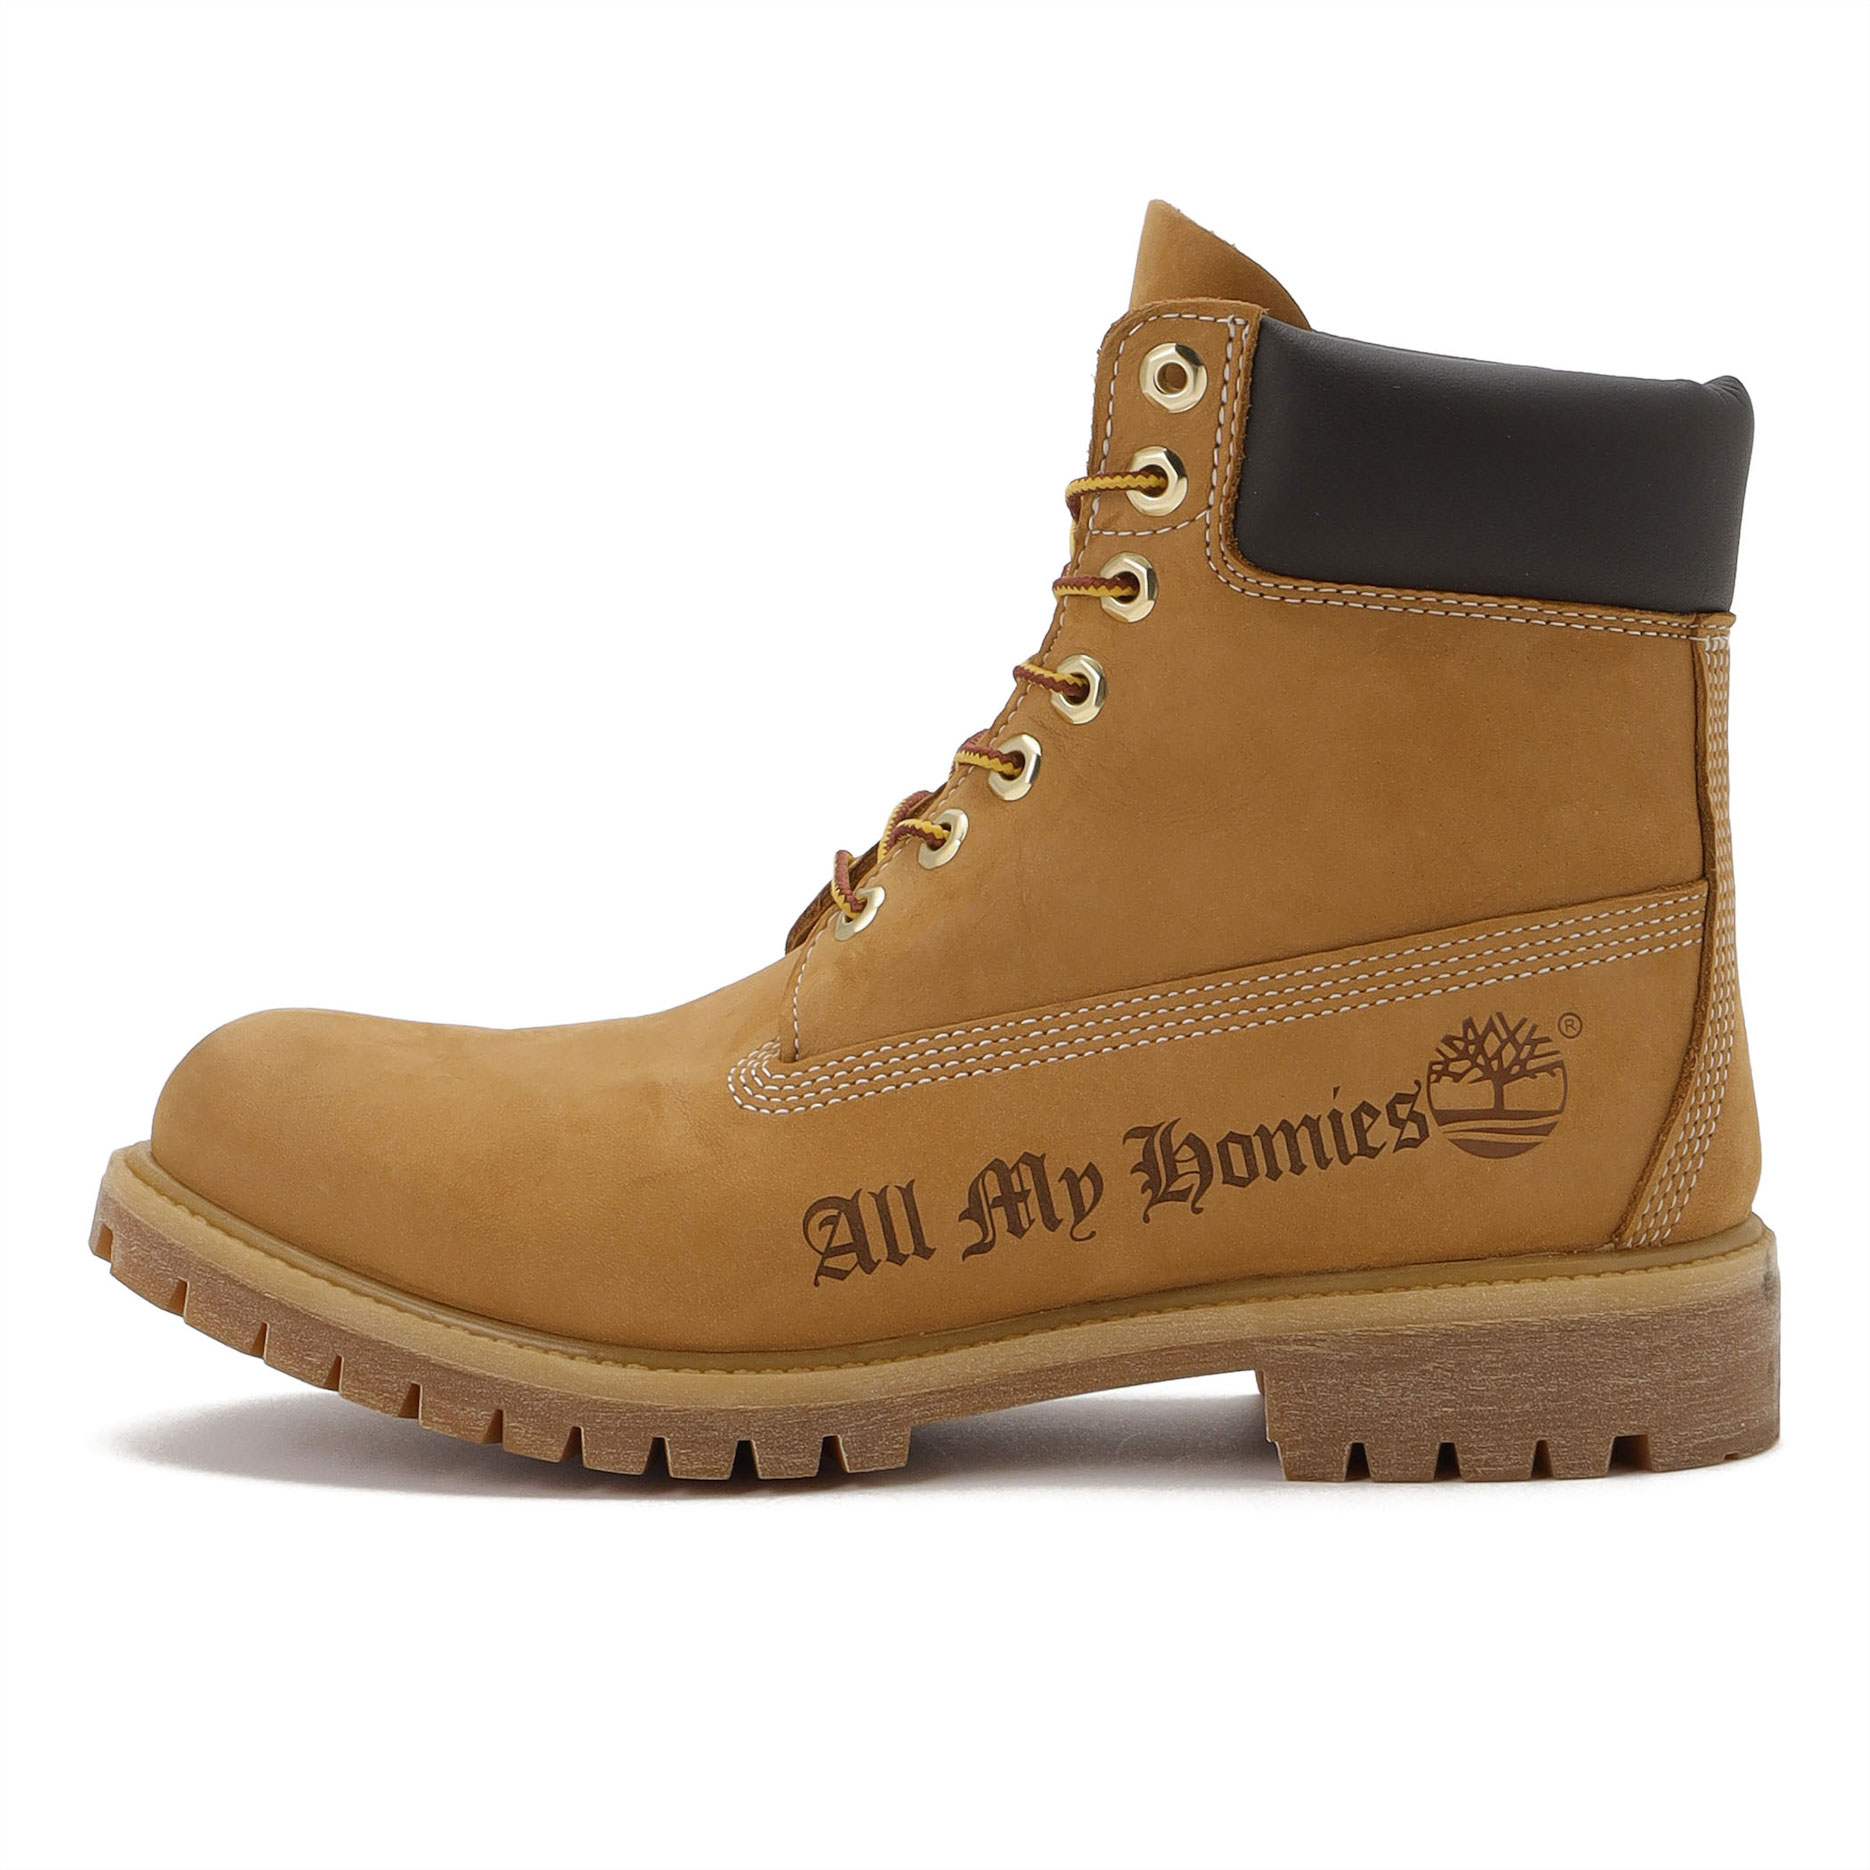 TIMBERLAND BOUTIQUE TOKYO – OPEN記念 | Timberland公式サイト